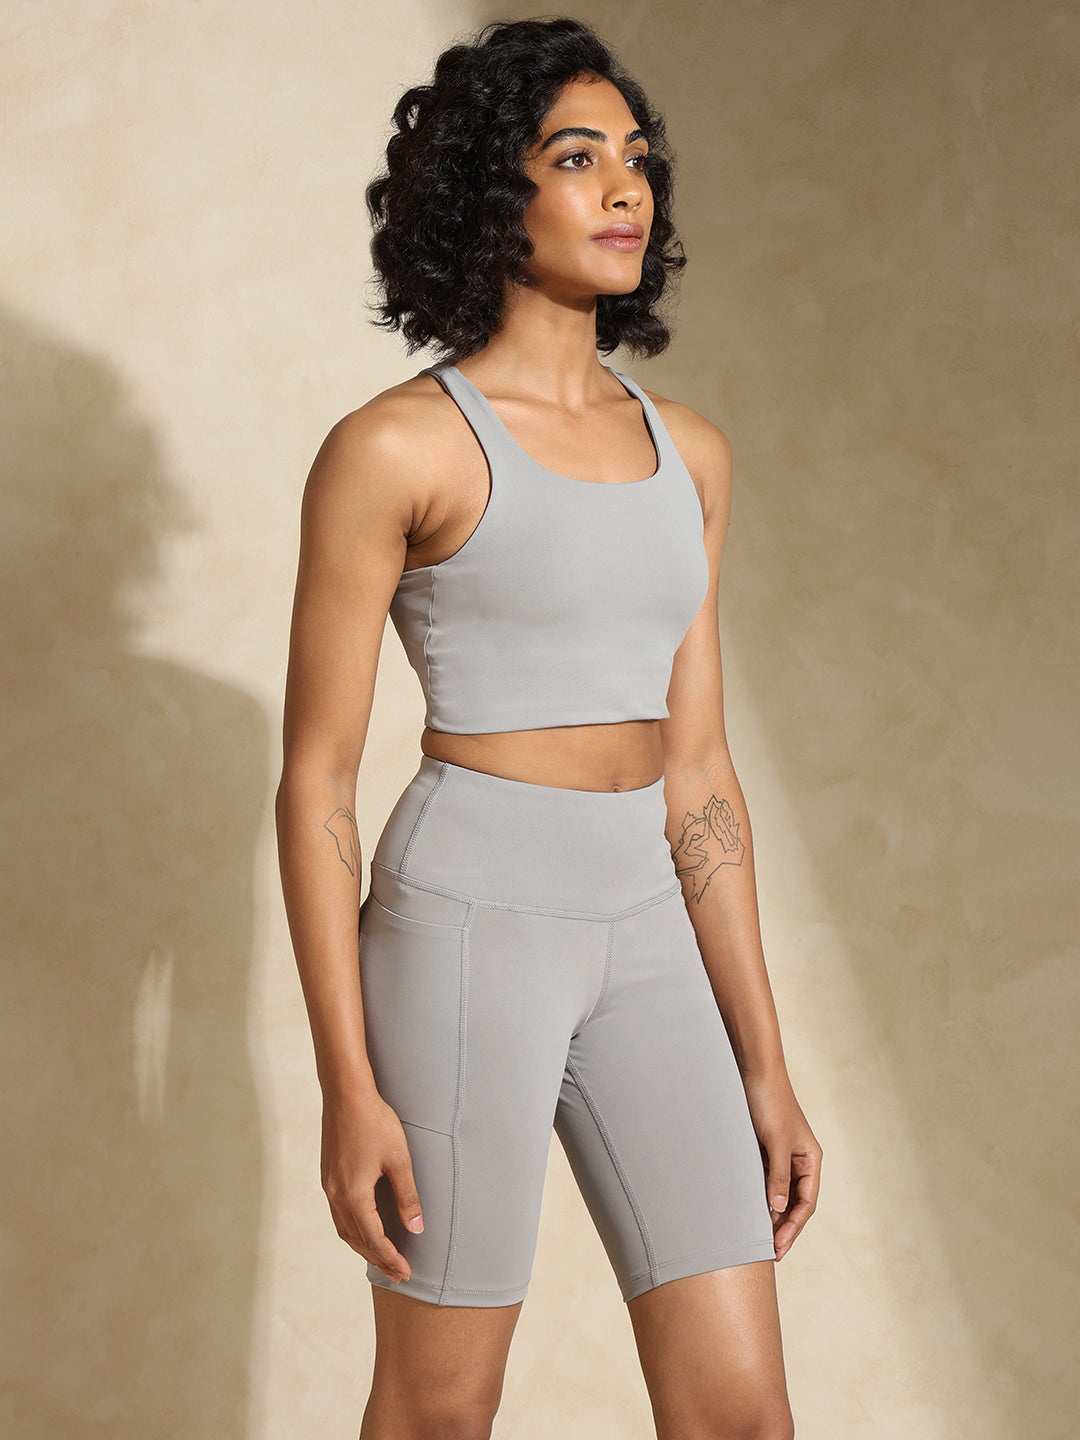 Cloud Grey High Impact Action Bra With Clasp & Aura Cycling Shorts